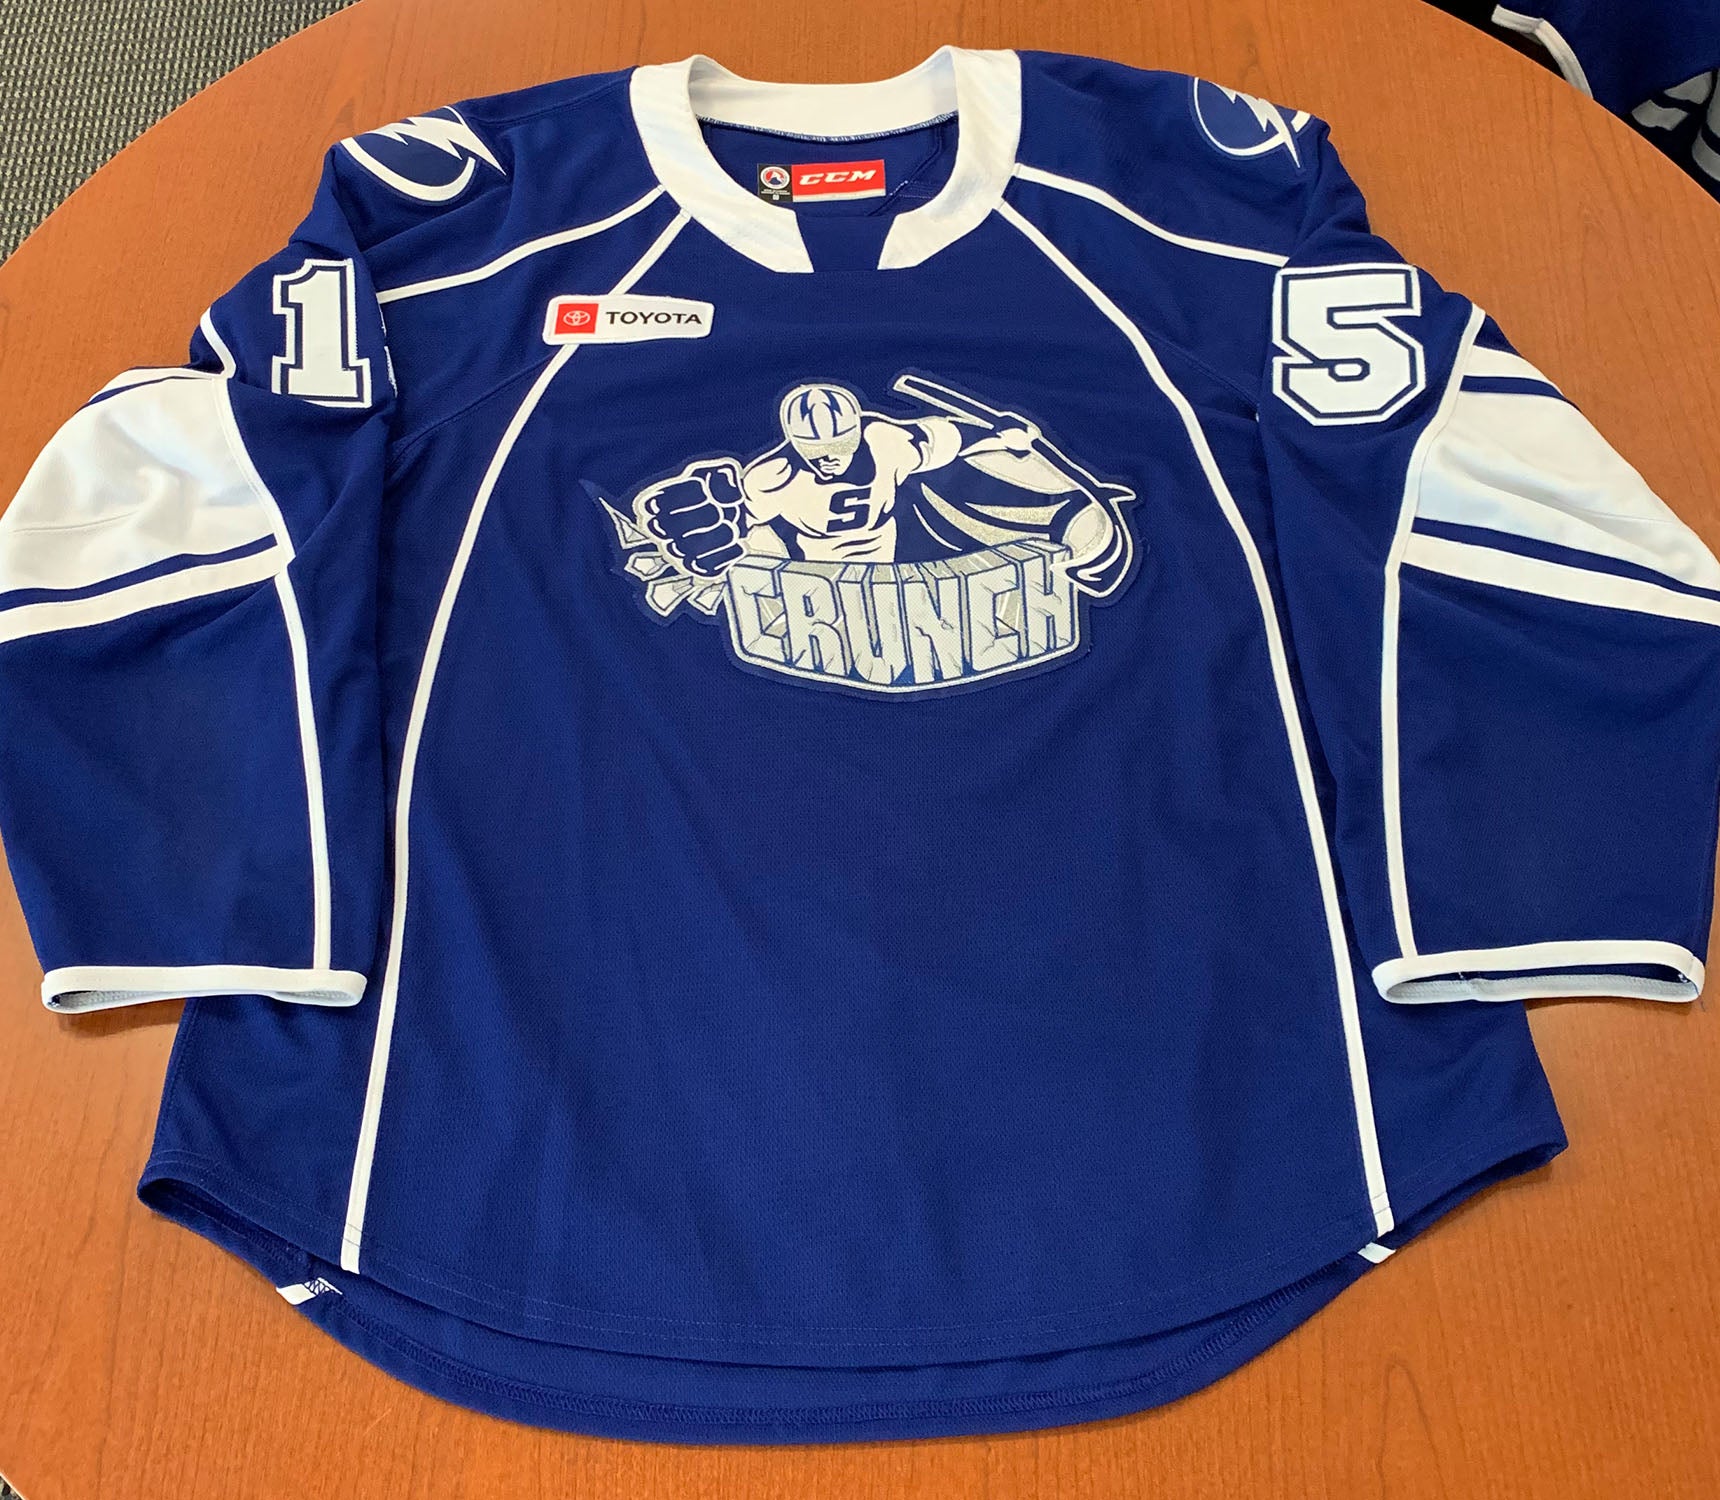 15 Jimmy Huntington Hockey Fights Cancer Jersey - November 27, 2021 –  Syracuse Crunch Official Team Store